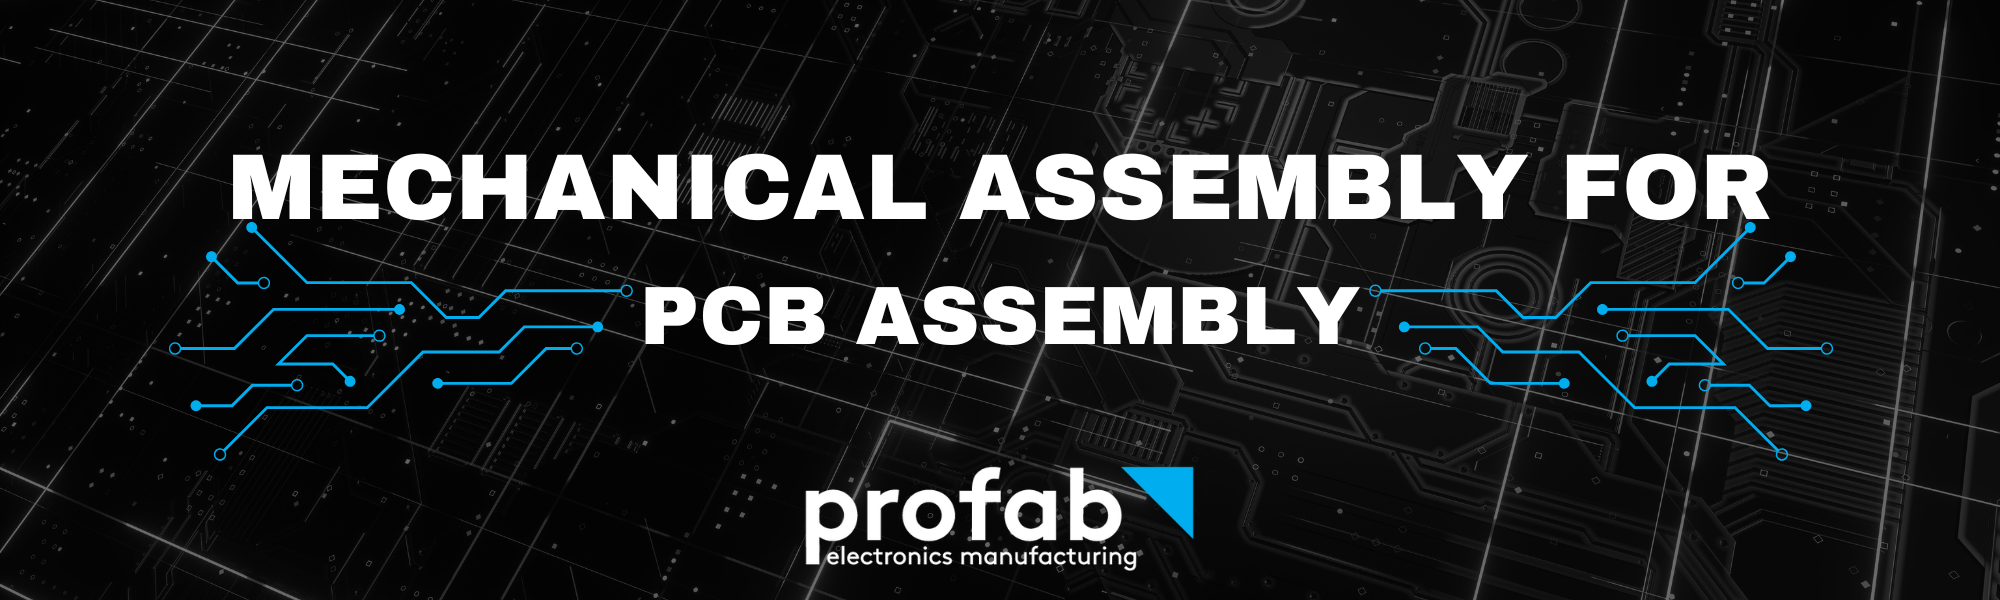 Mechanical Assembly for PCB Assemblies